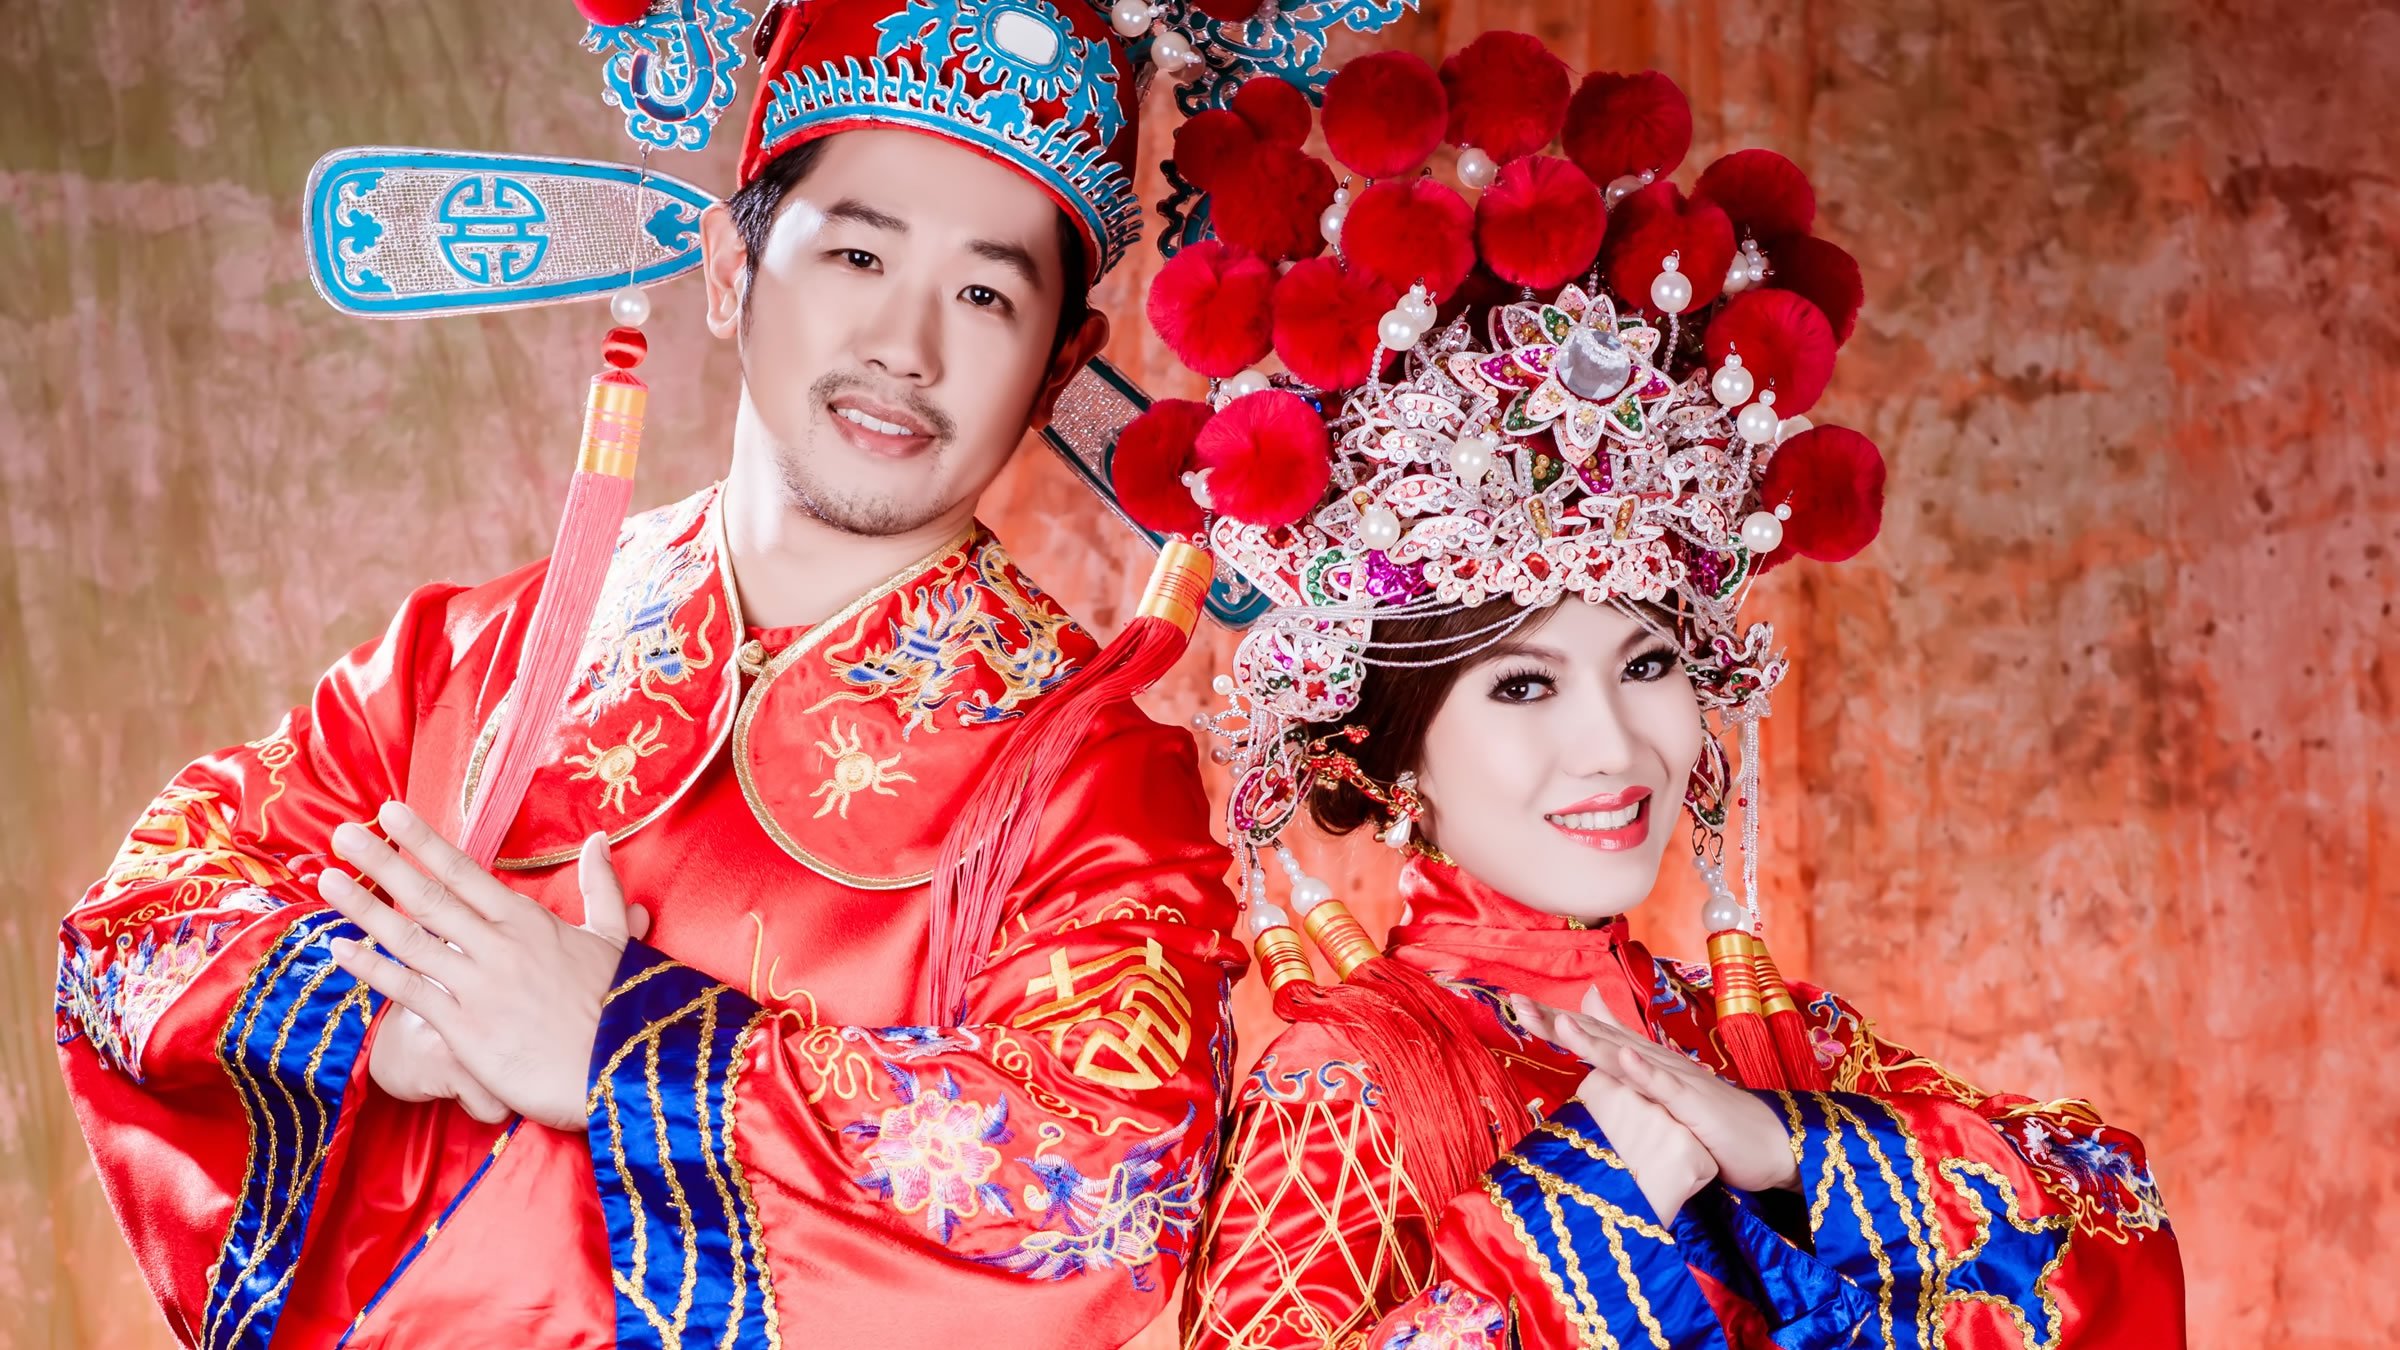 Chinese wedding with typical attire of the bride and groom